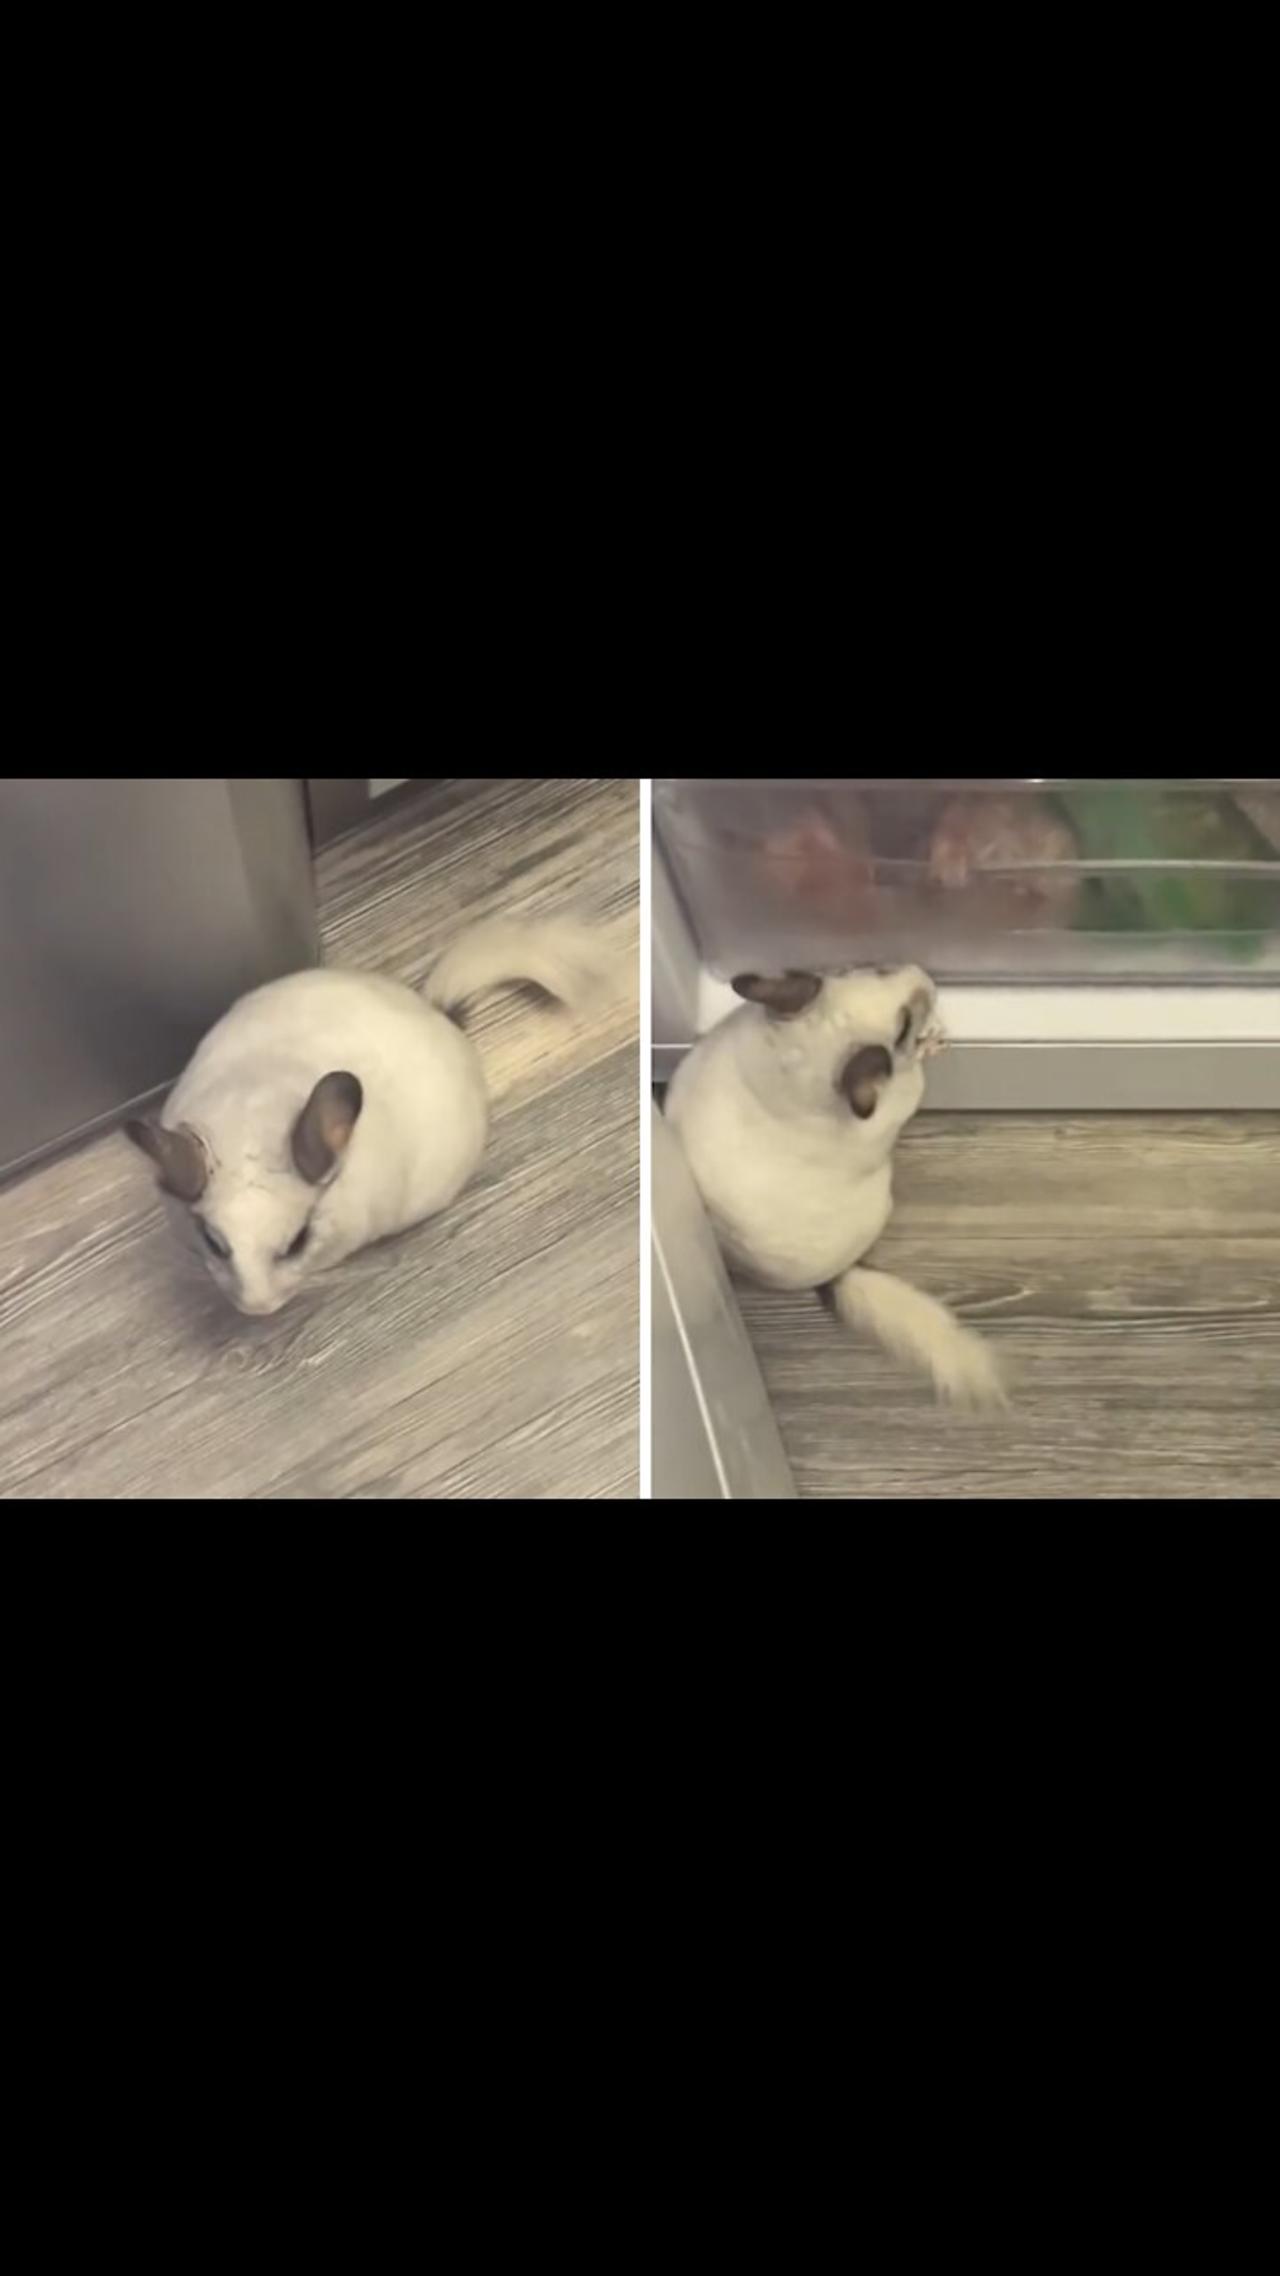 Hungry chinchilla opens up fridge to get a snack